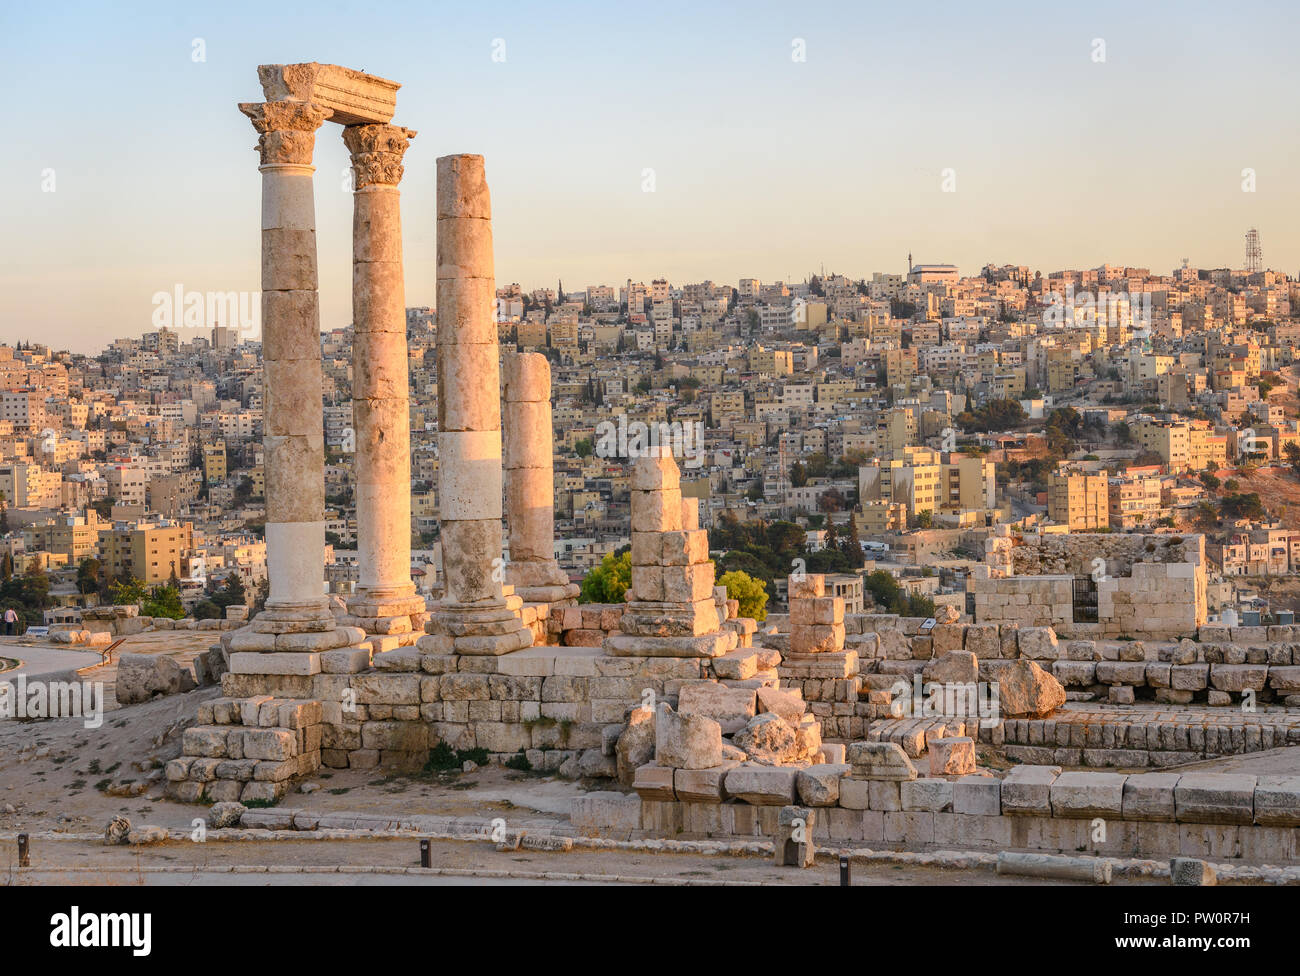 Amman, Jordan its Roman ruins in the middle of the ancient citadel park in the center of the city. Sunset on Skyline of Amman and old town of the city Stock Photo